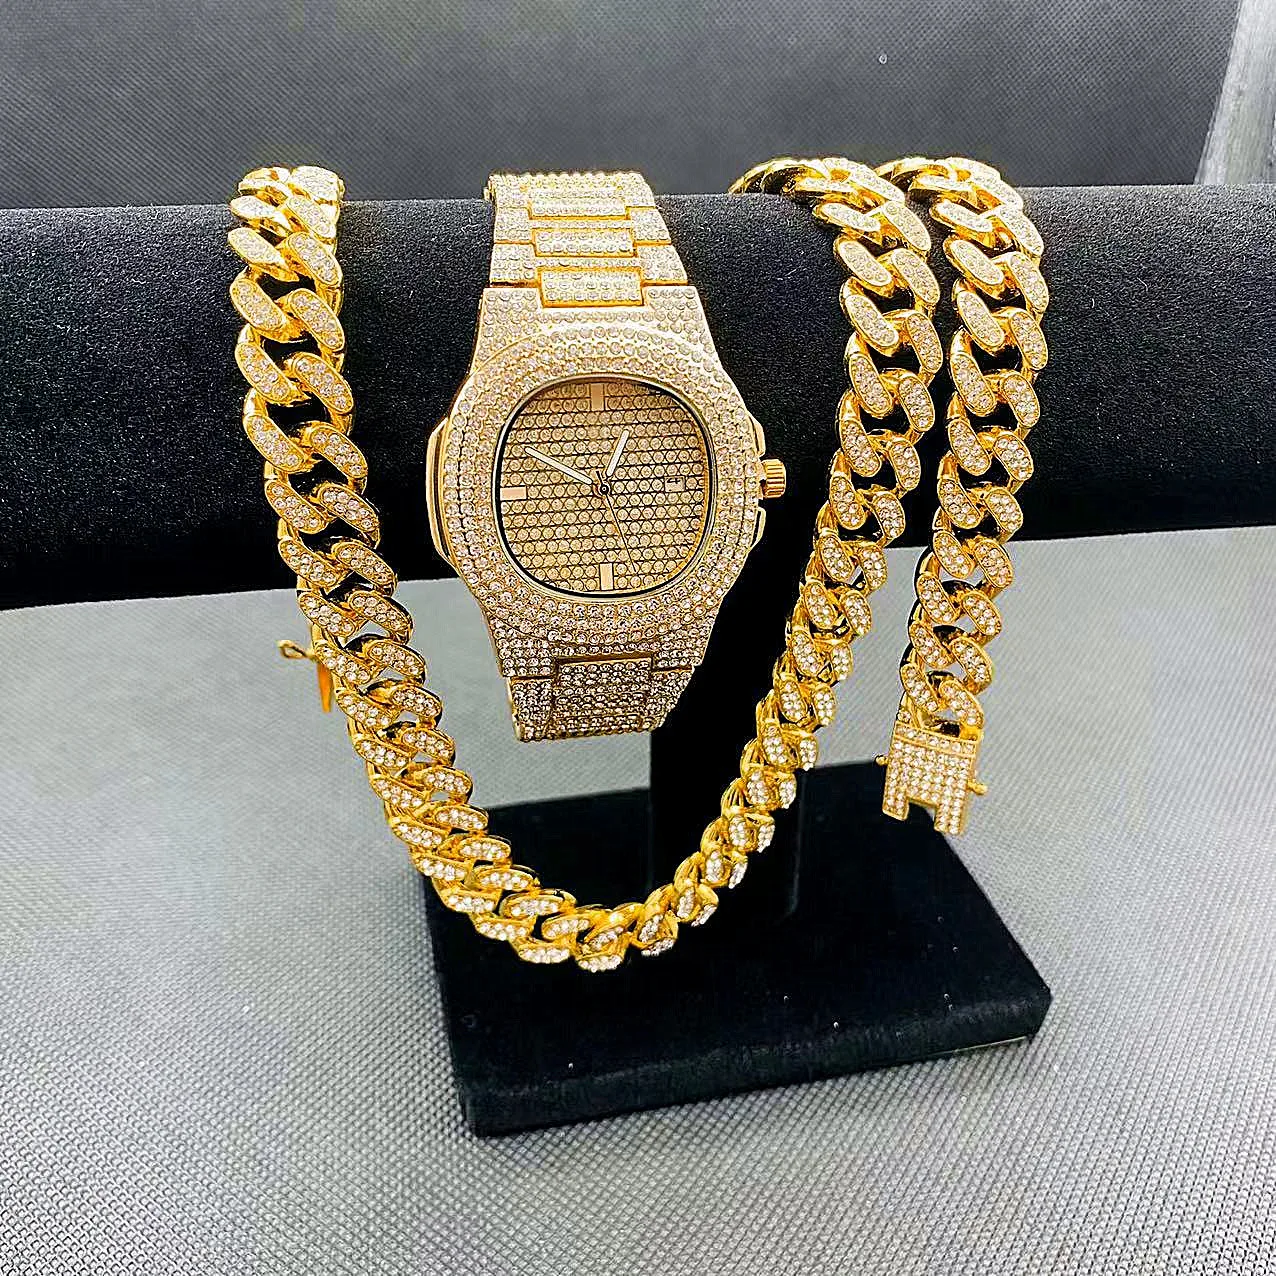 3pcs Fashion Mens Jewelry Set Iced Out Watch Necklaces Bracelet Mens Hip Hop Miama Cuban link Chains Choker Jewelry Gold Watches